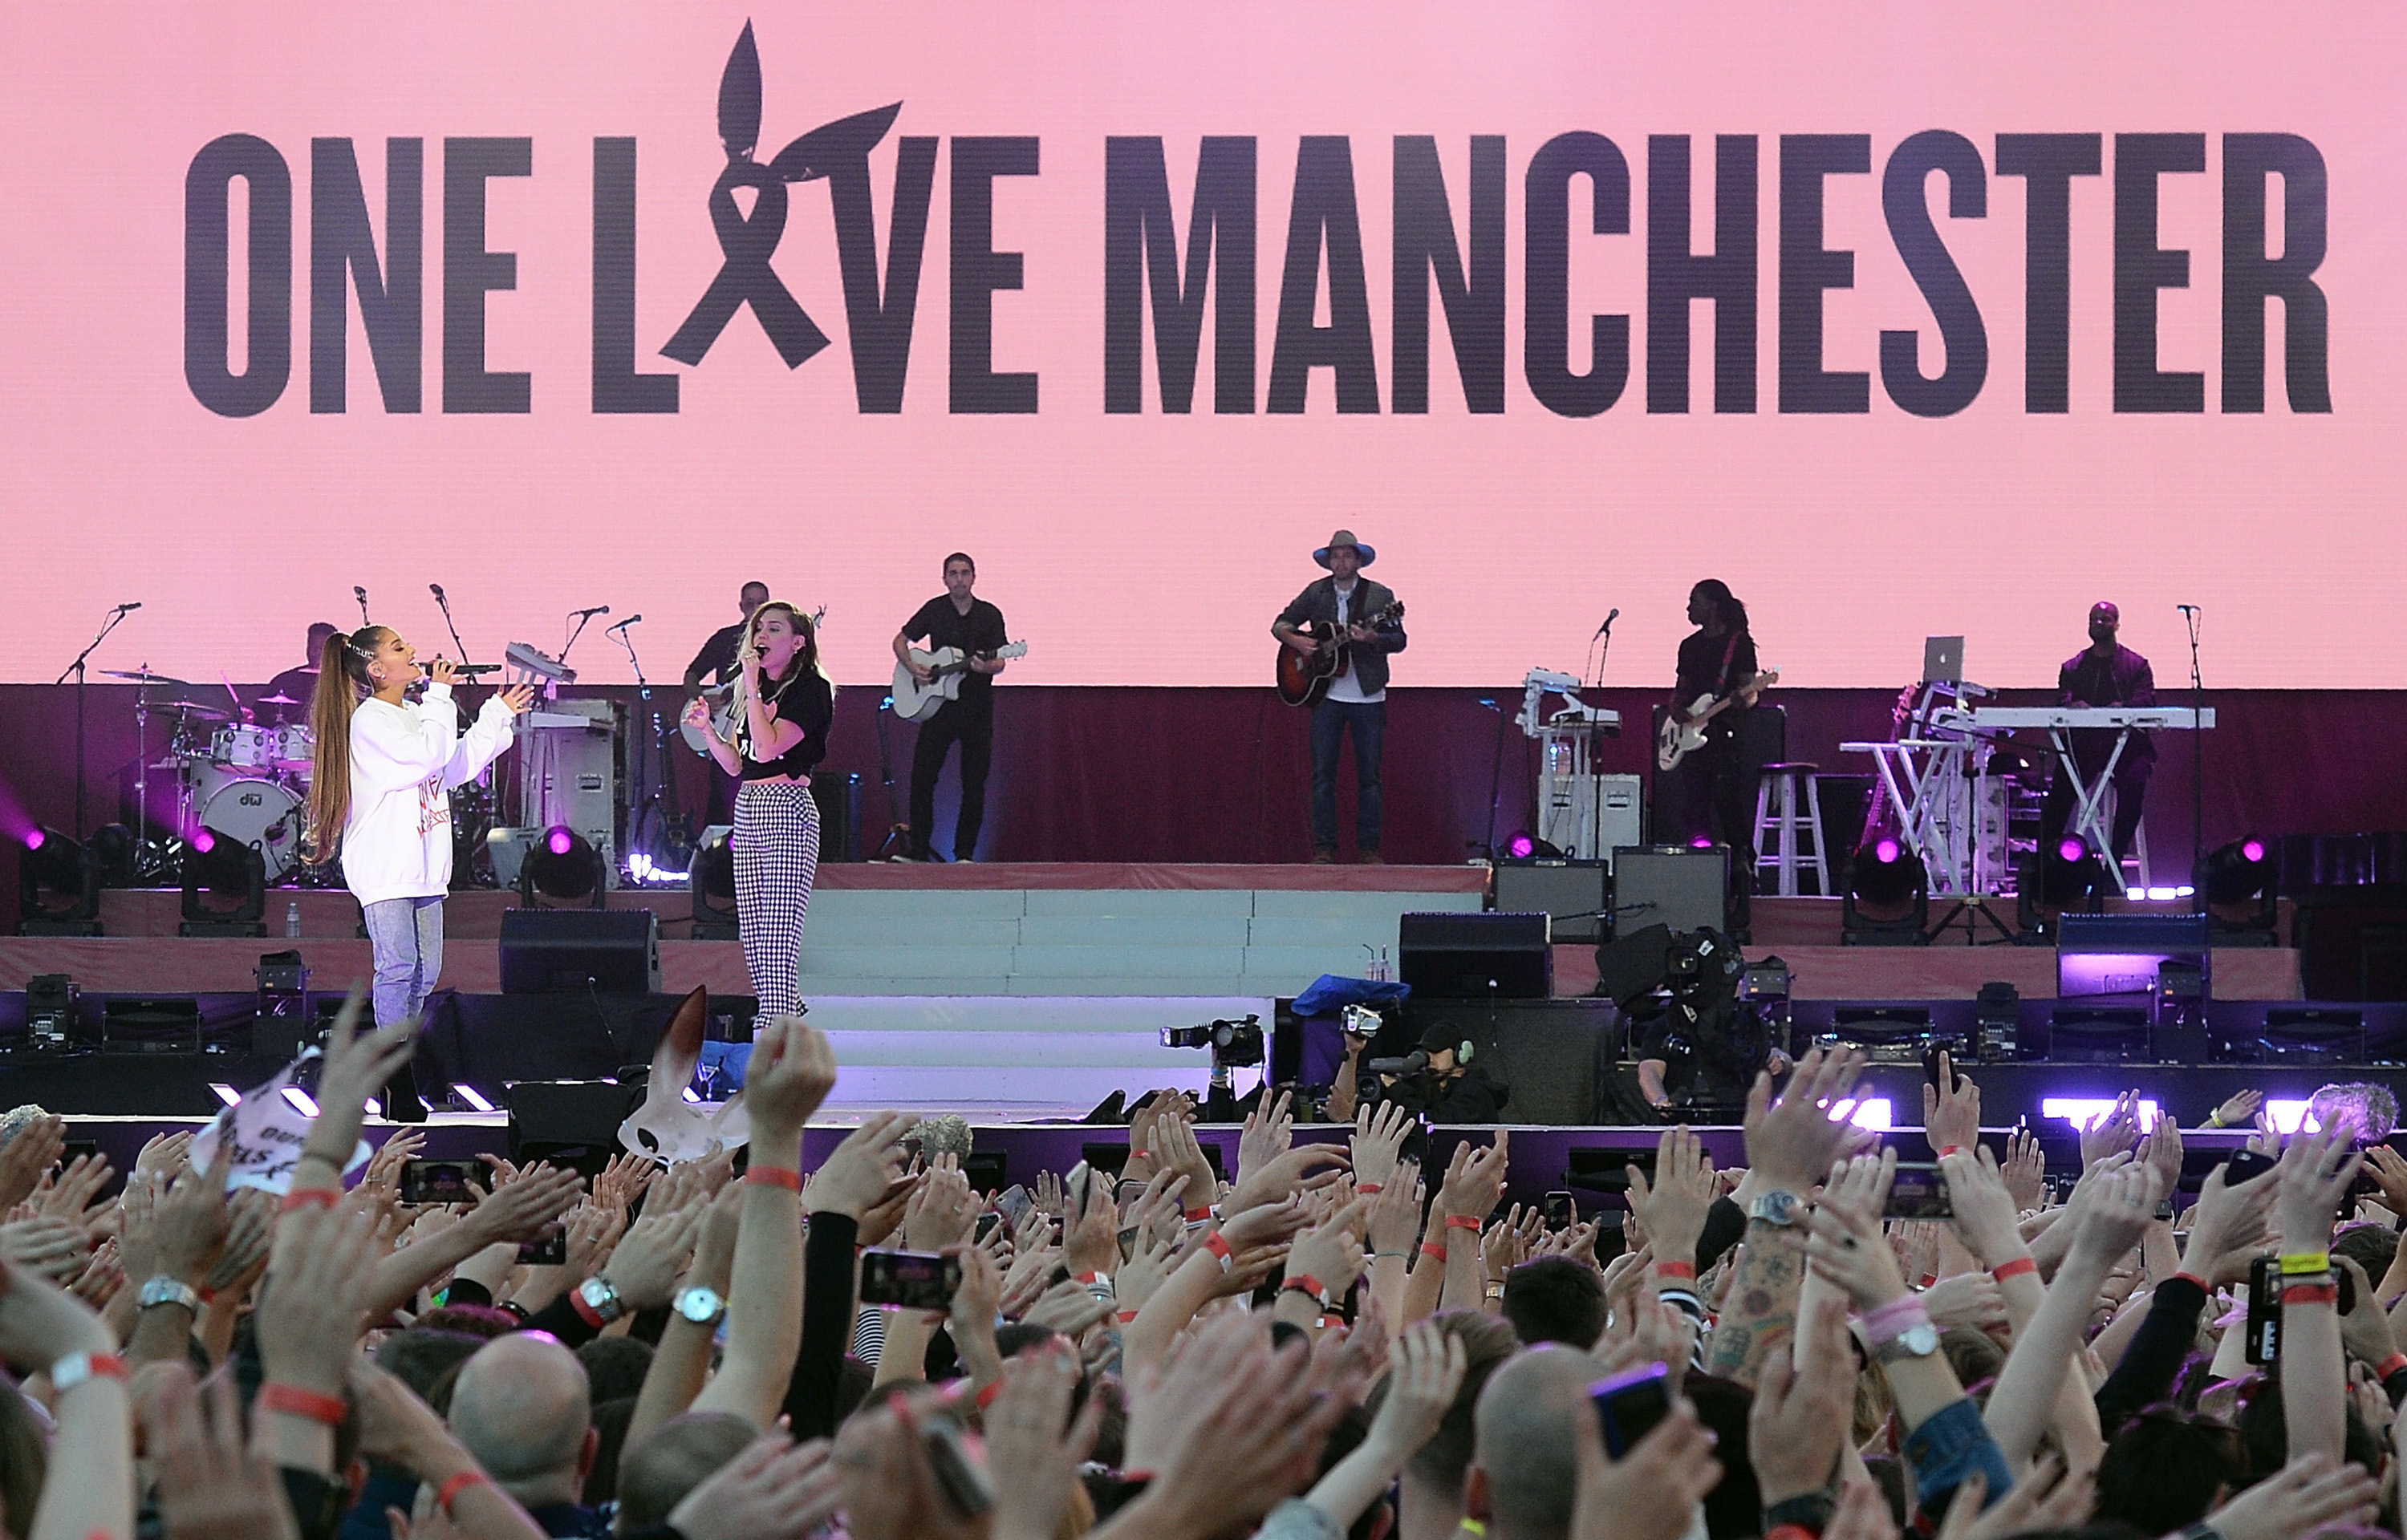 One Love Manchester (Dave Hogan for One Love Manchester)